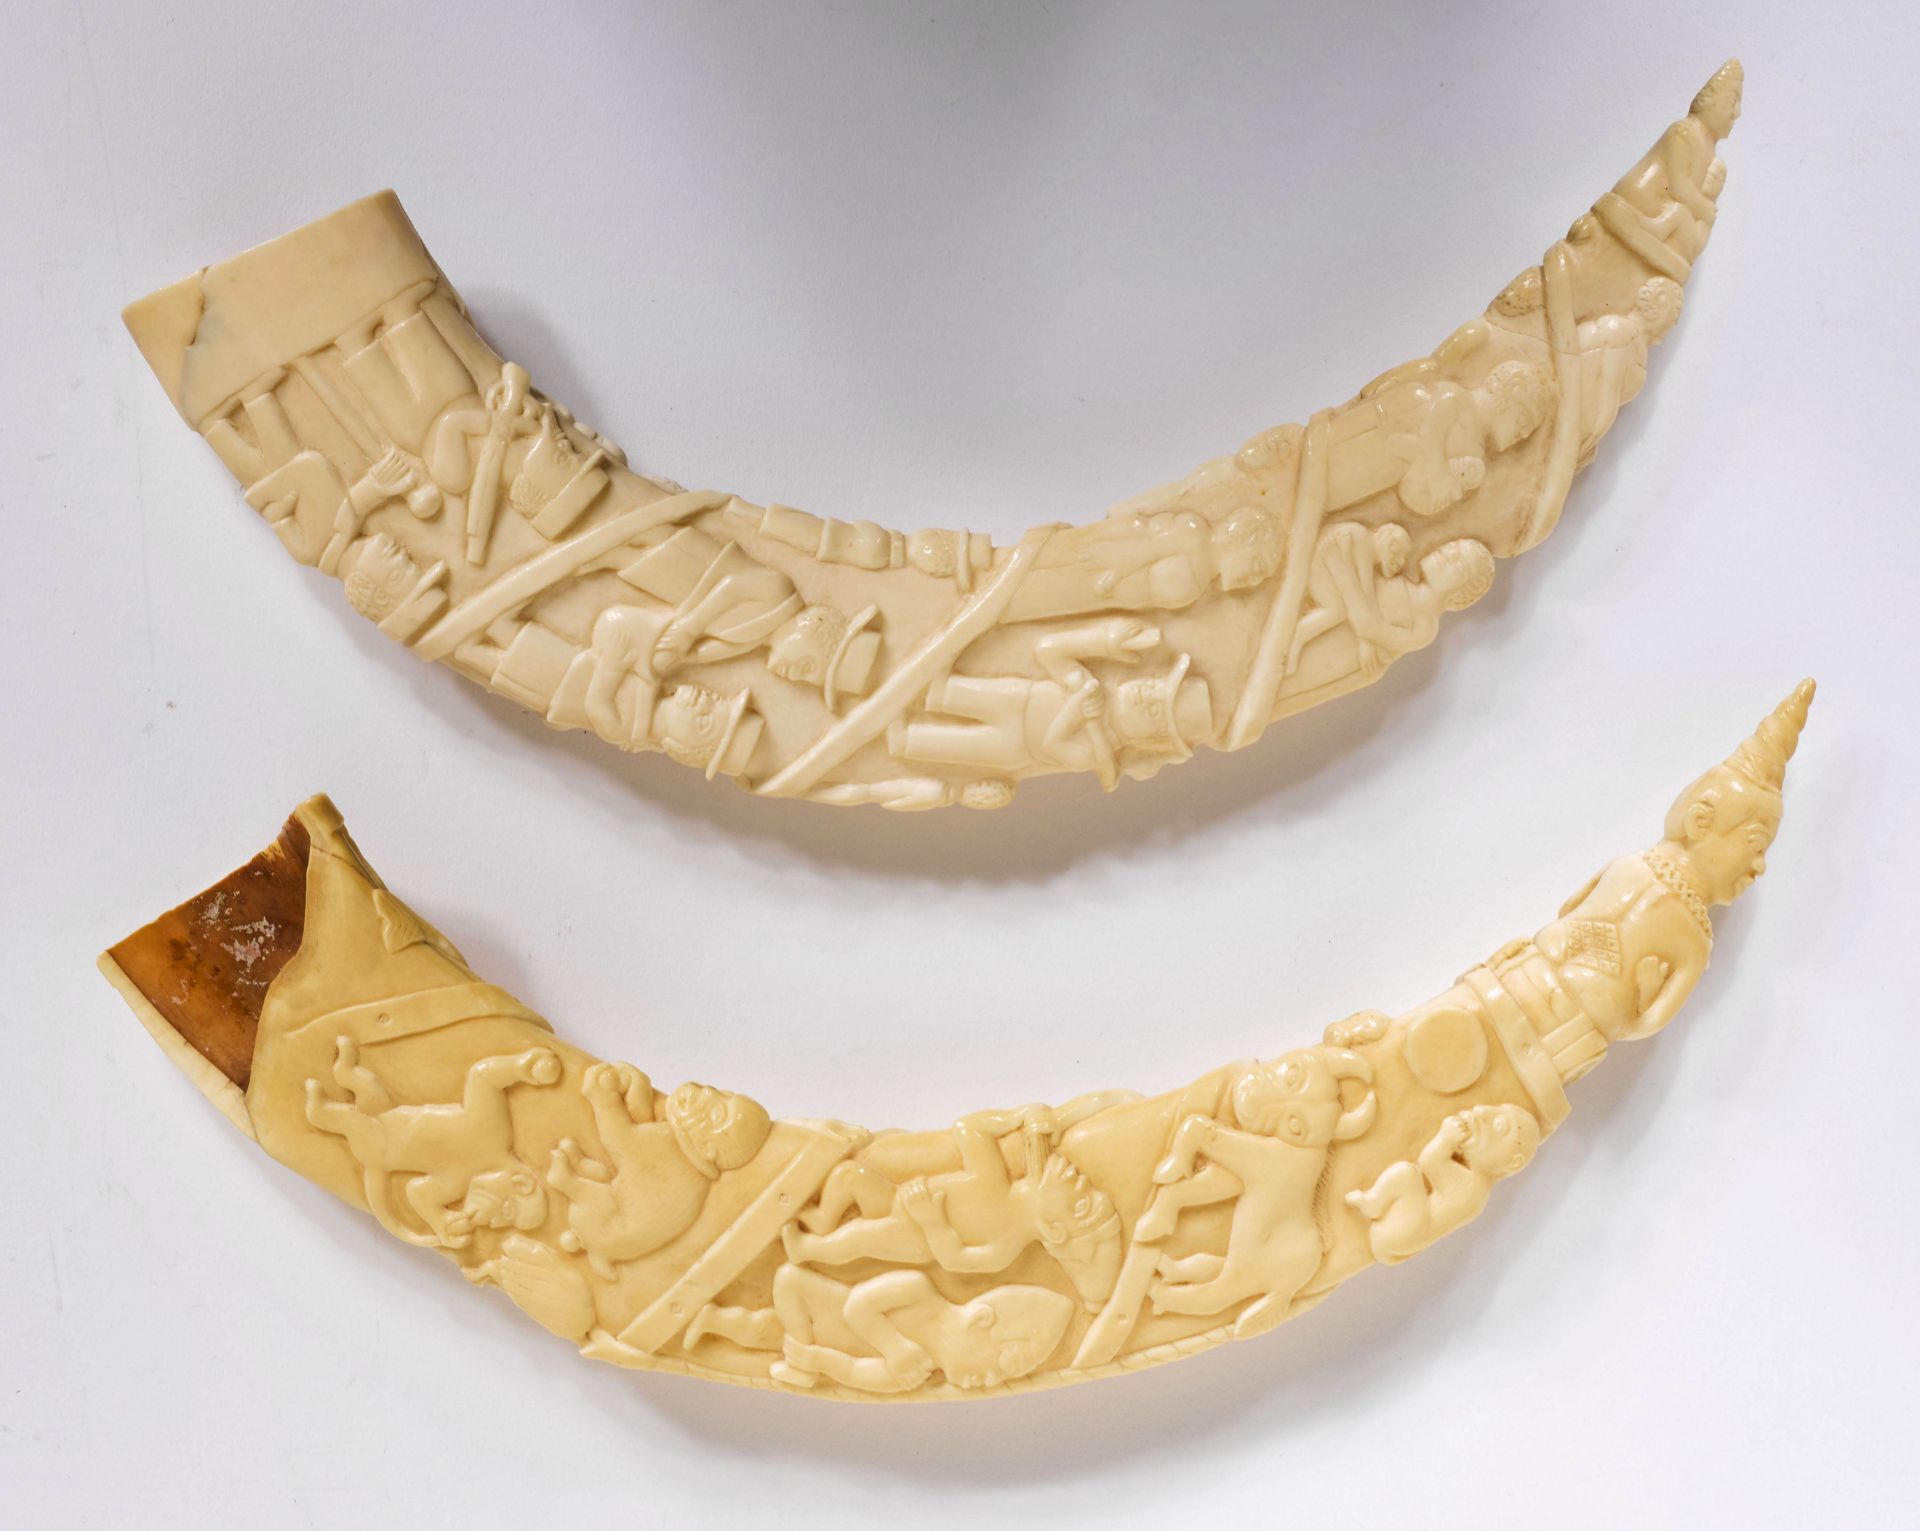 TWO CARVED HIPPOPOTAMUS TUSKS - Image 2 of 4